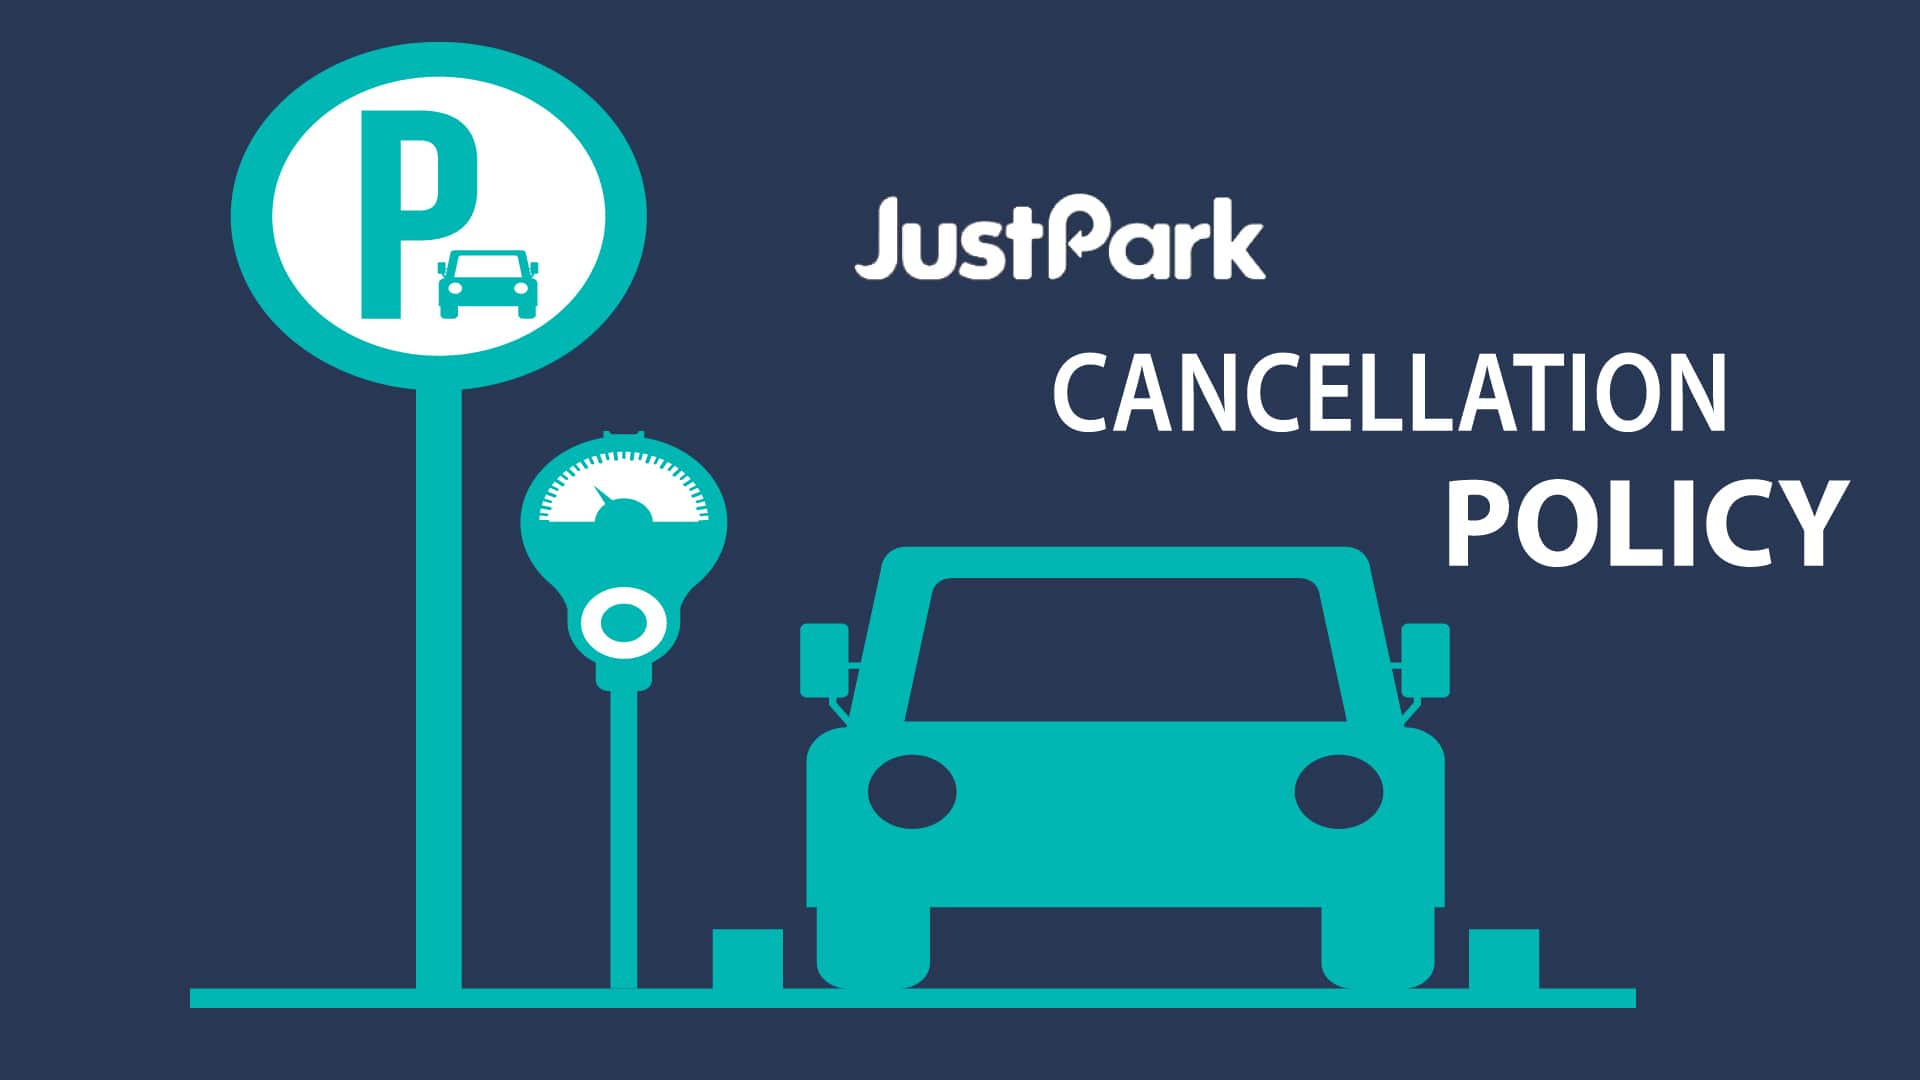 Just Park Cancellation Policy